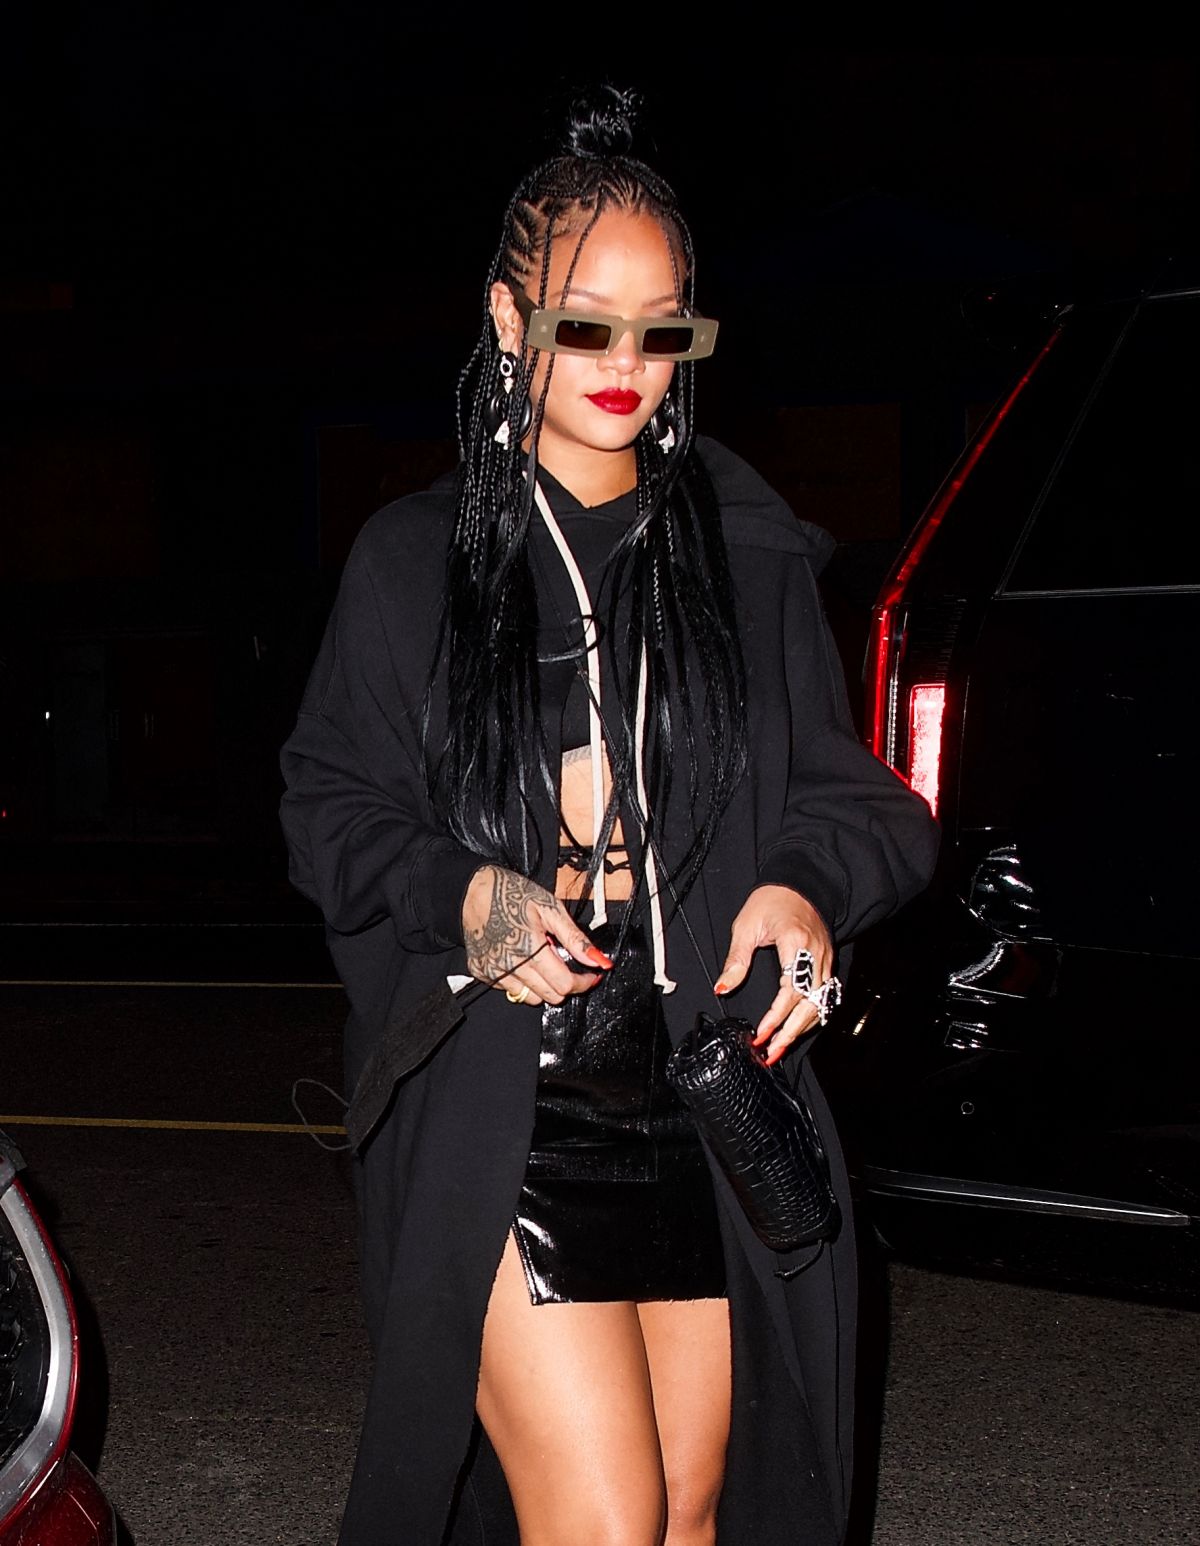 Rihanna in a TINY skirt and crop top at Giorgio Baldi for dinner in Los Angeles